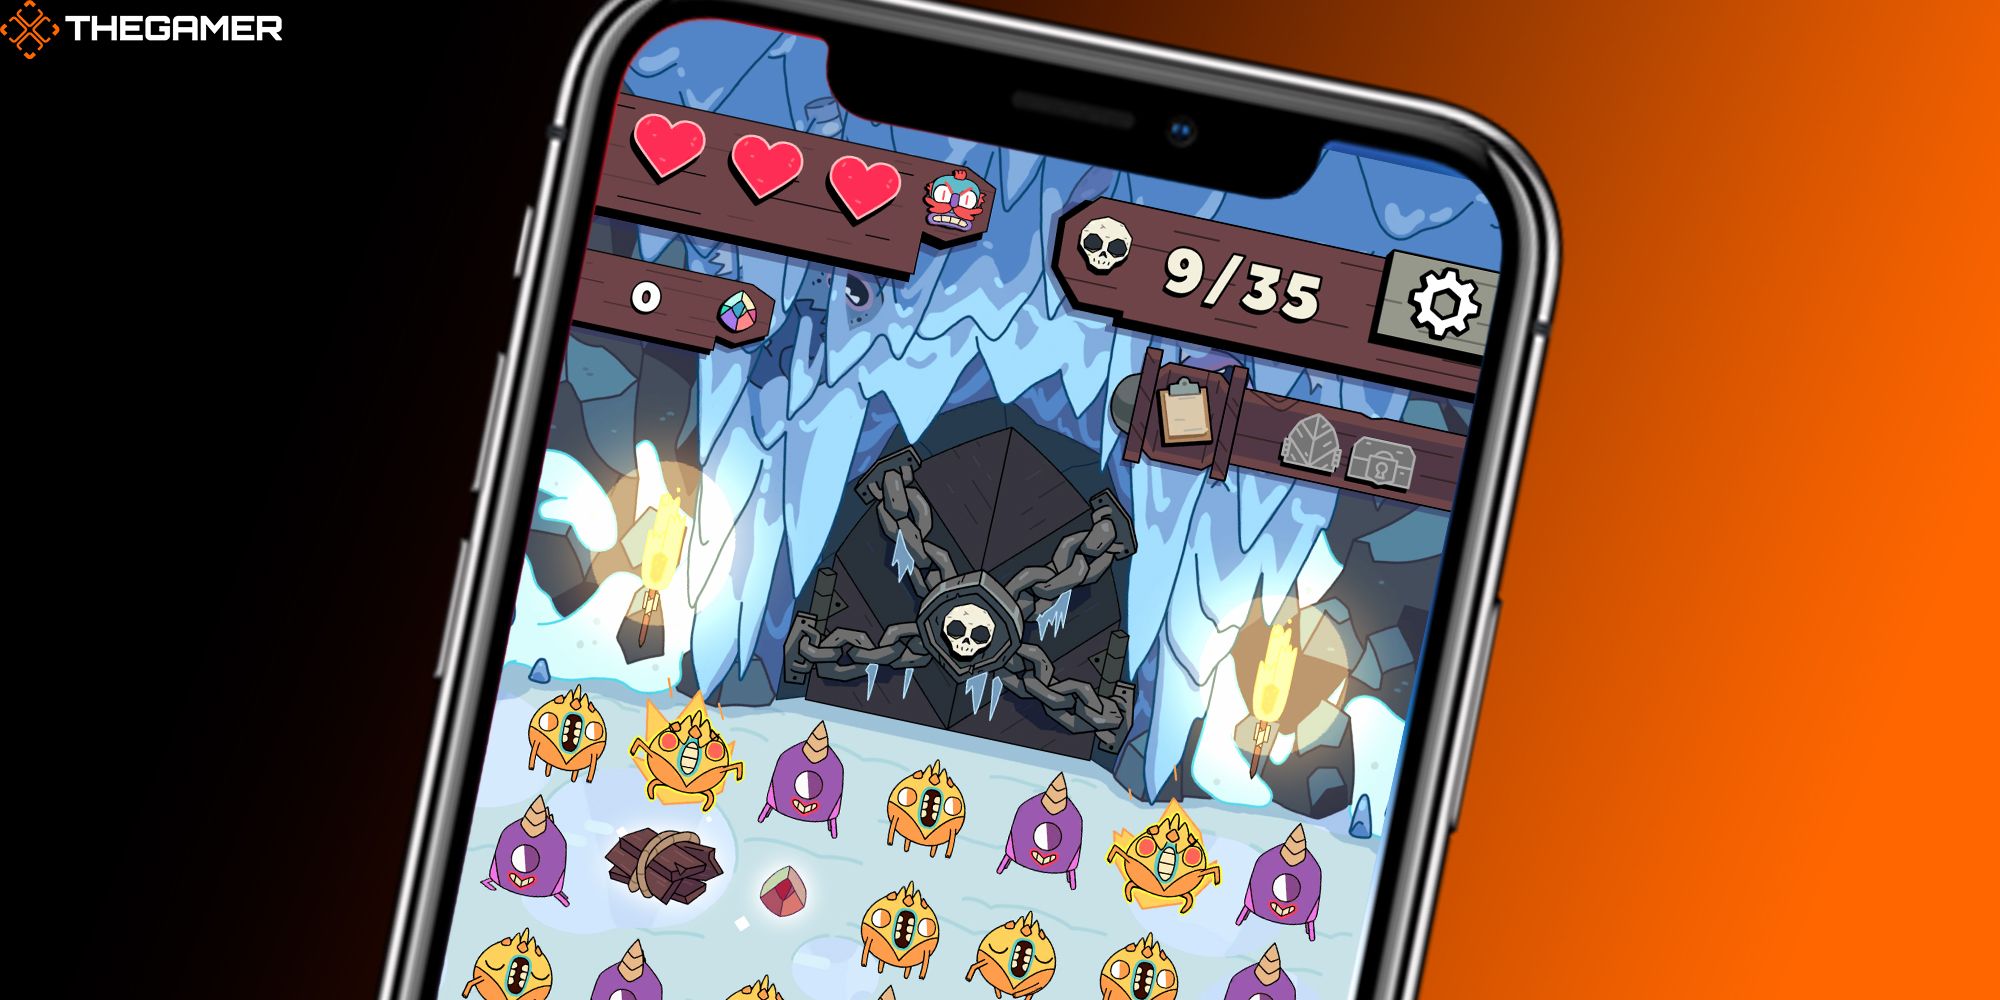 An iPhone screen displays Grindstone gameplay. The phone itself sits on an orange and black backdrop. Custom image for TG.